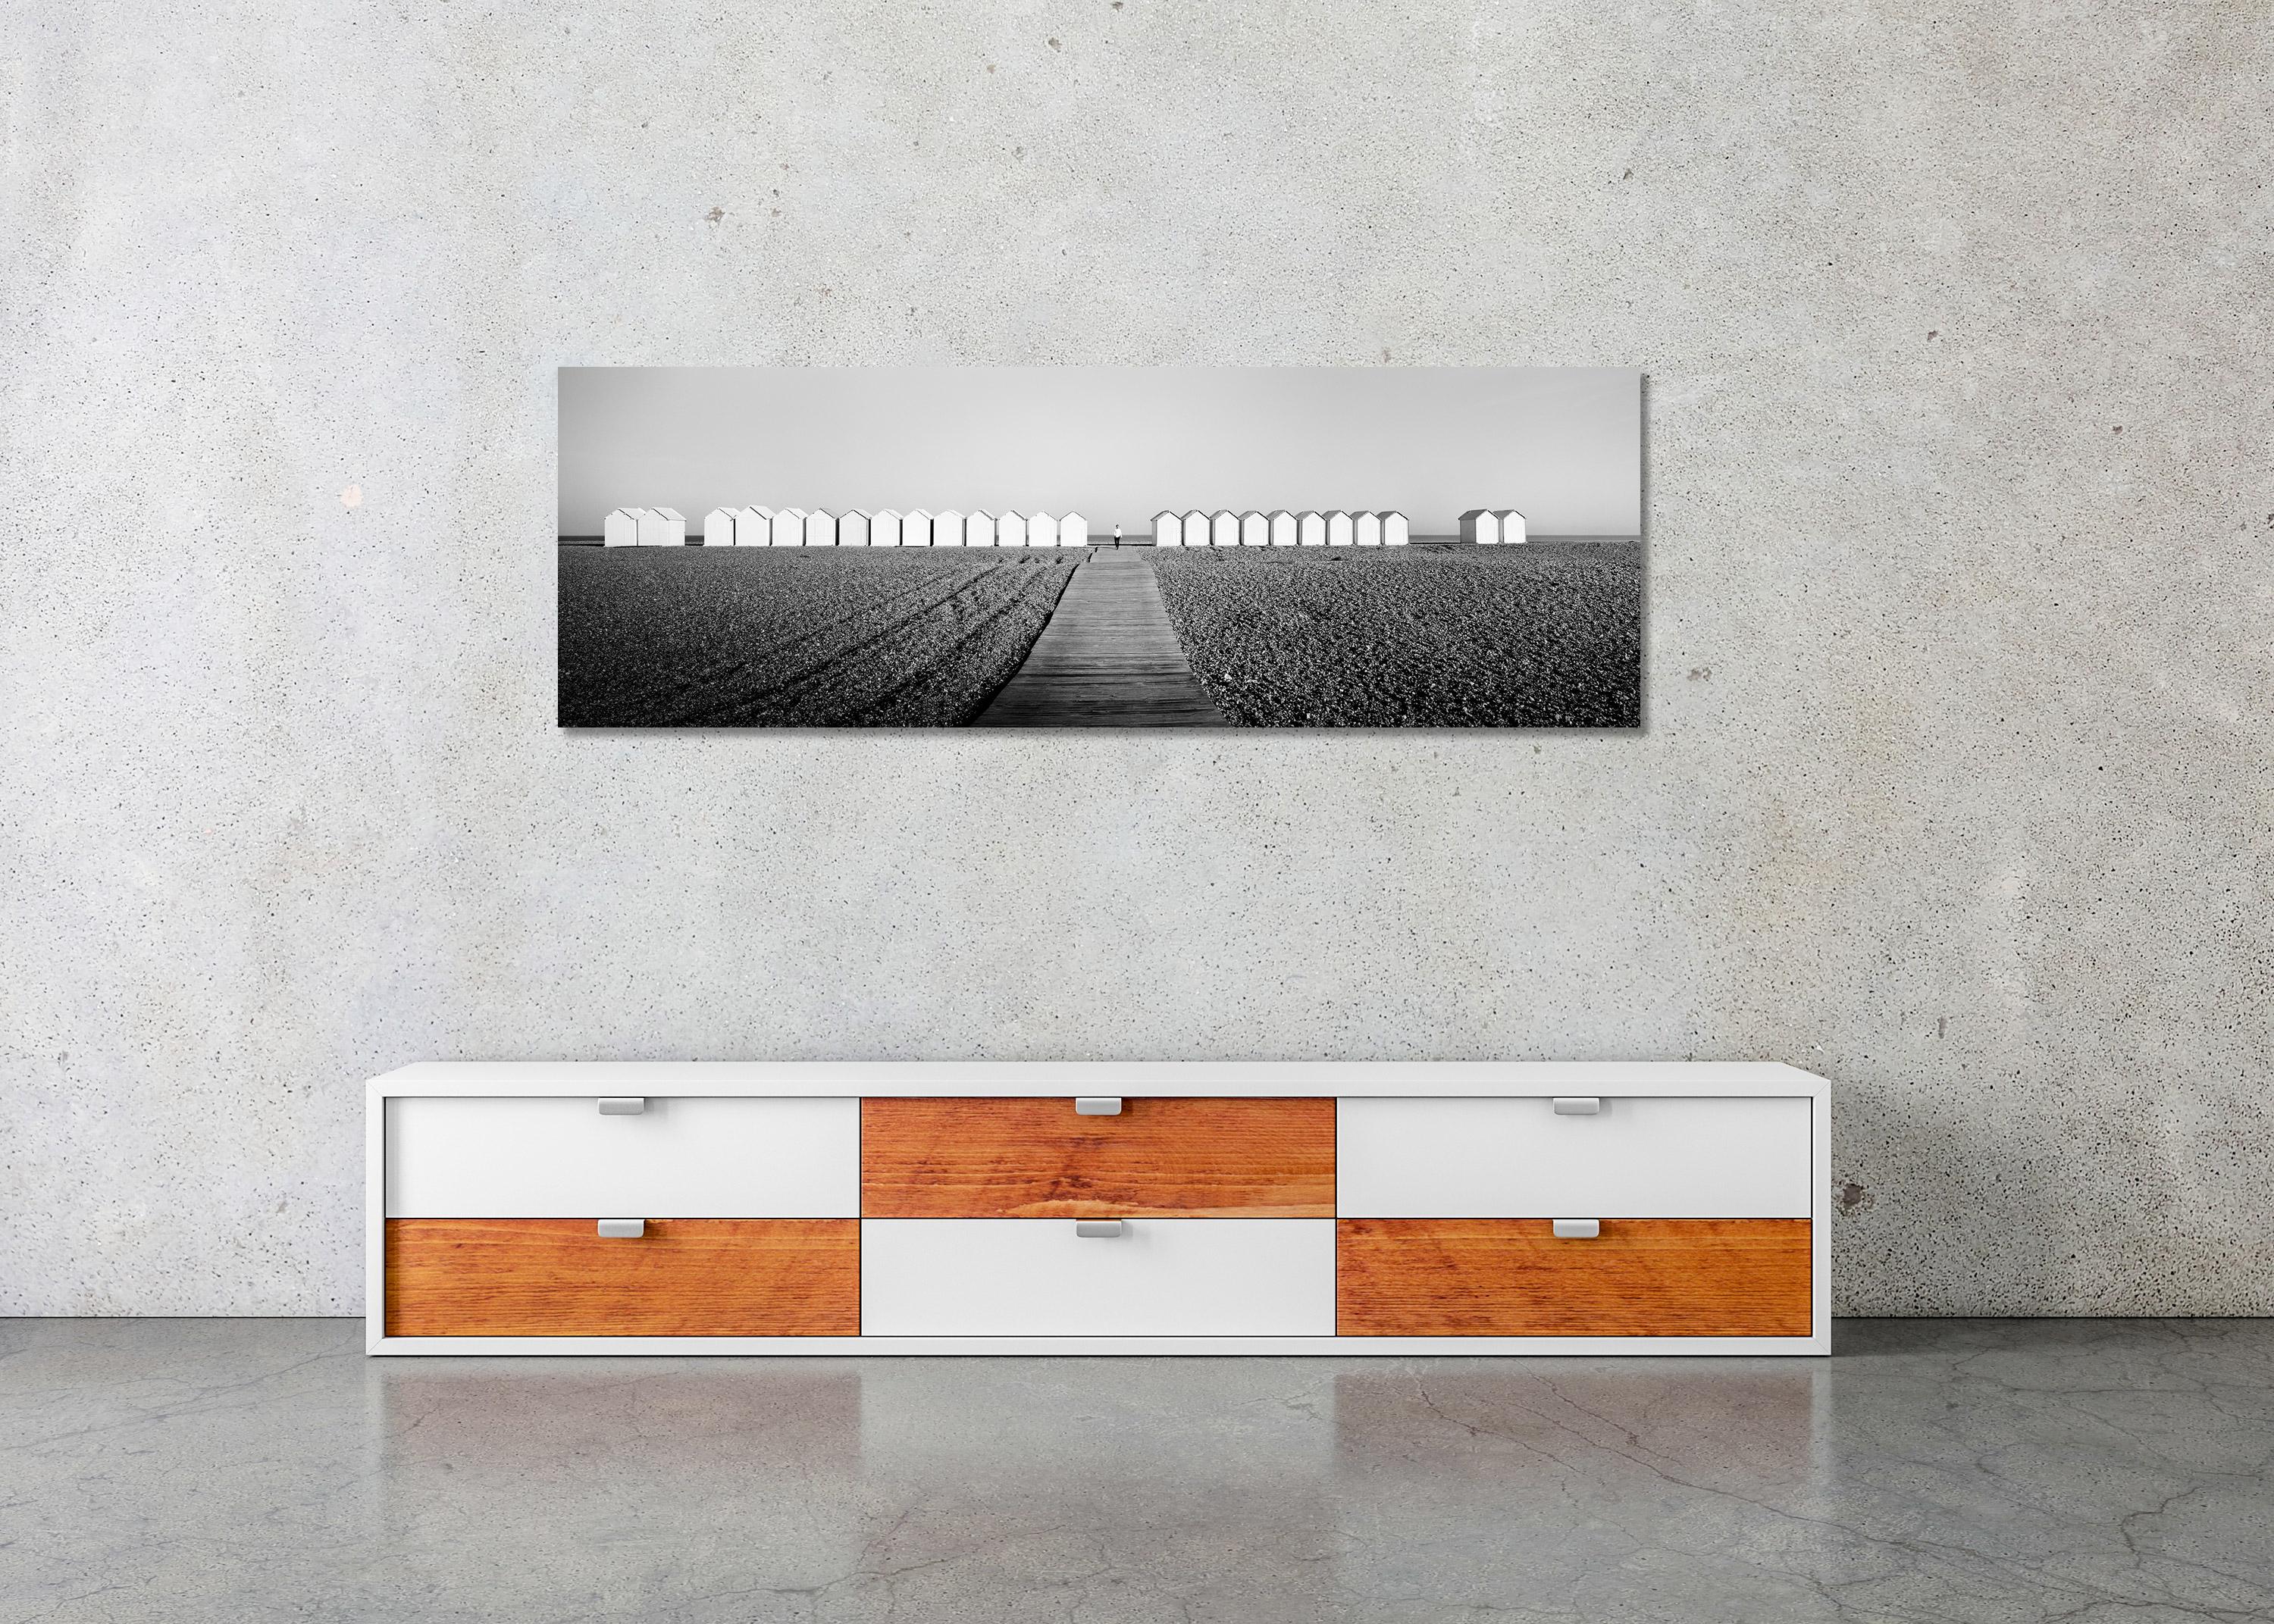 Black and white fine art panorama - landscape photography. Beach Huts, Panorama, Pier, Runner, France. Archival pigment ink print, edition of 9. Signed, titled, dated and numbered by artist. Certificate of authenticity included. Printed with 4cm